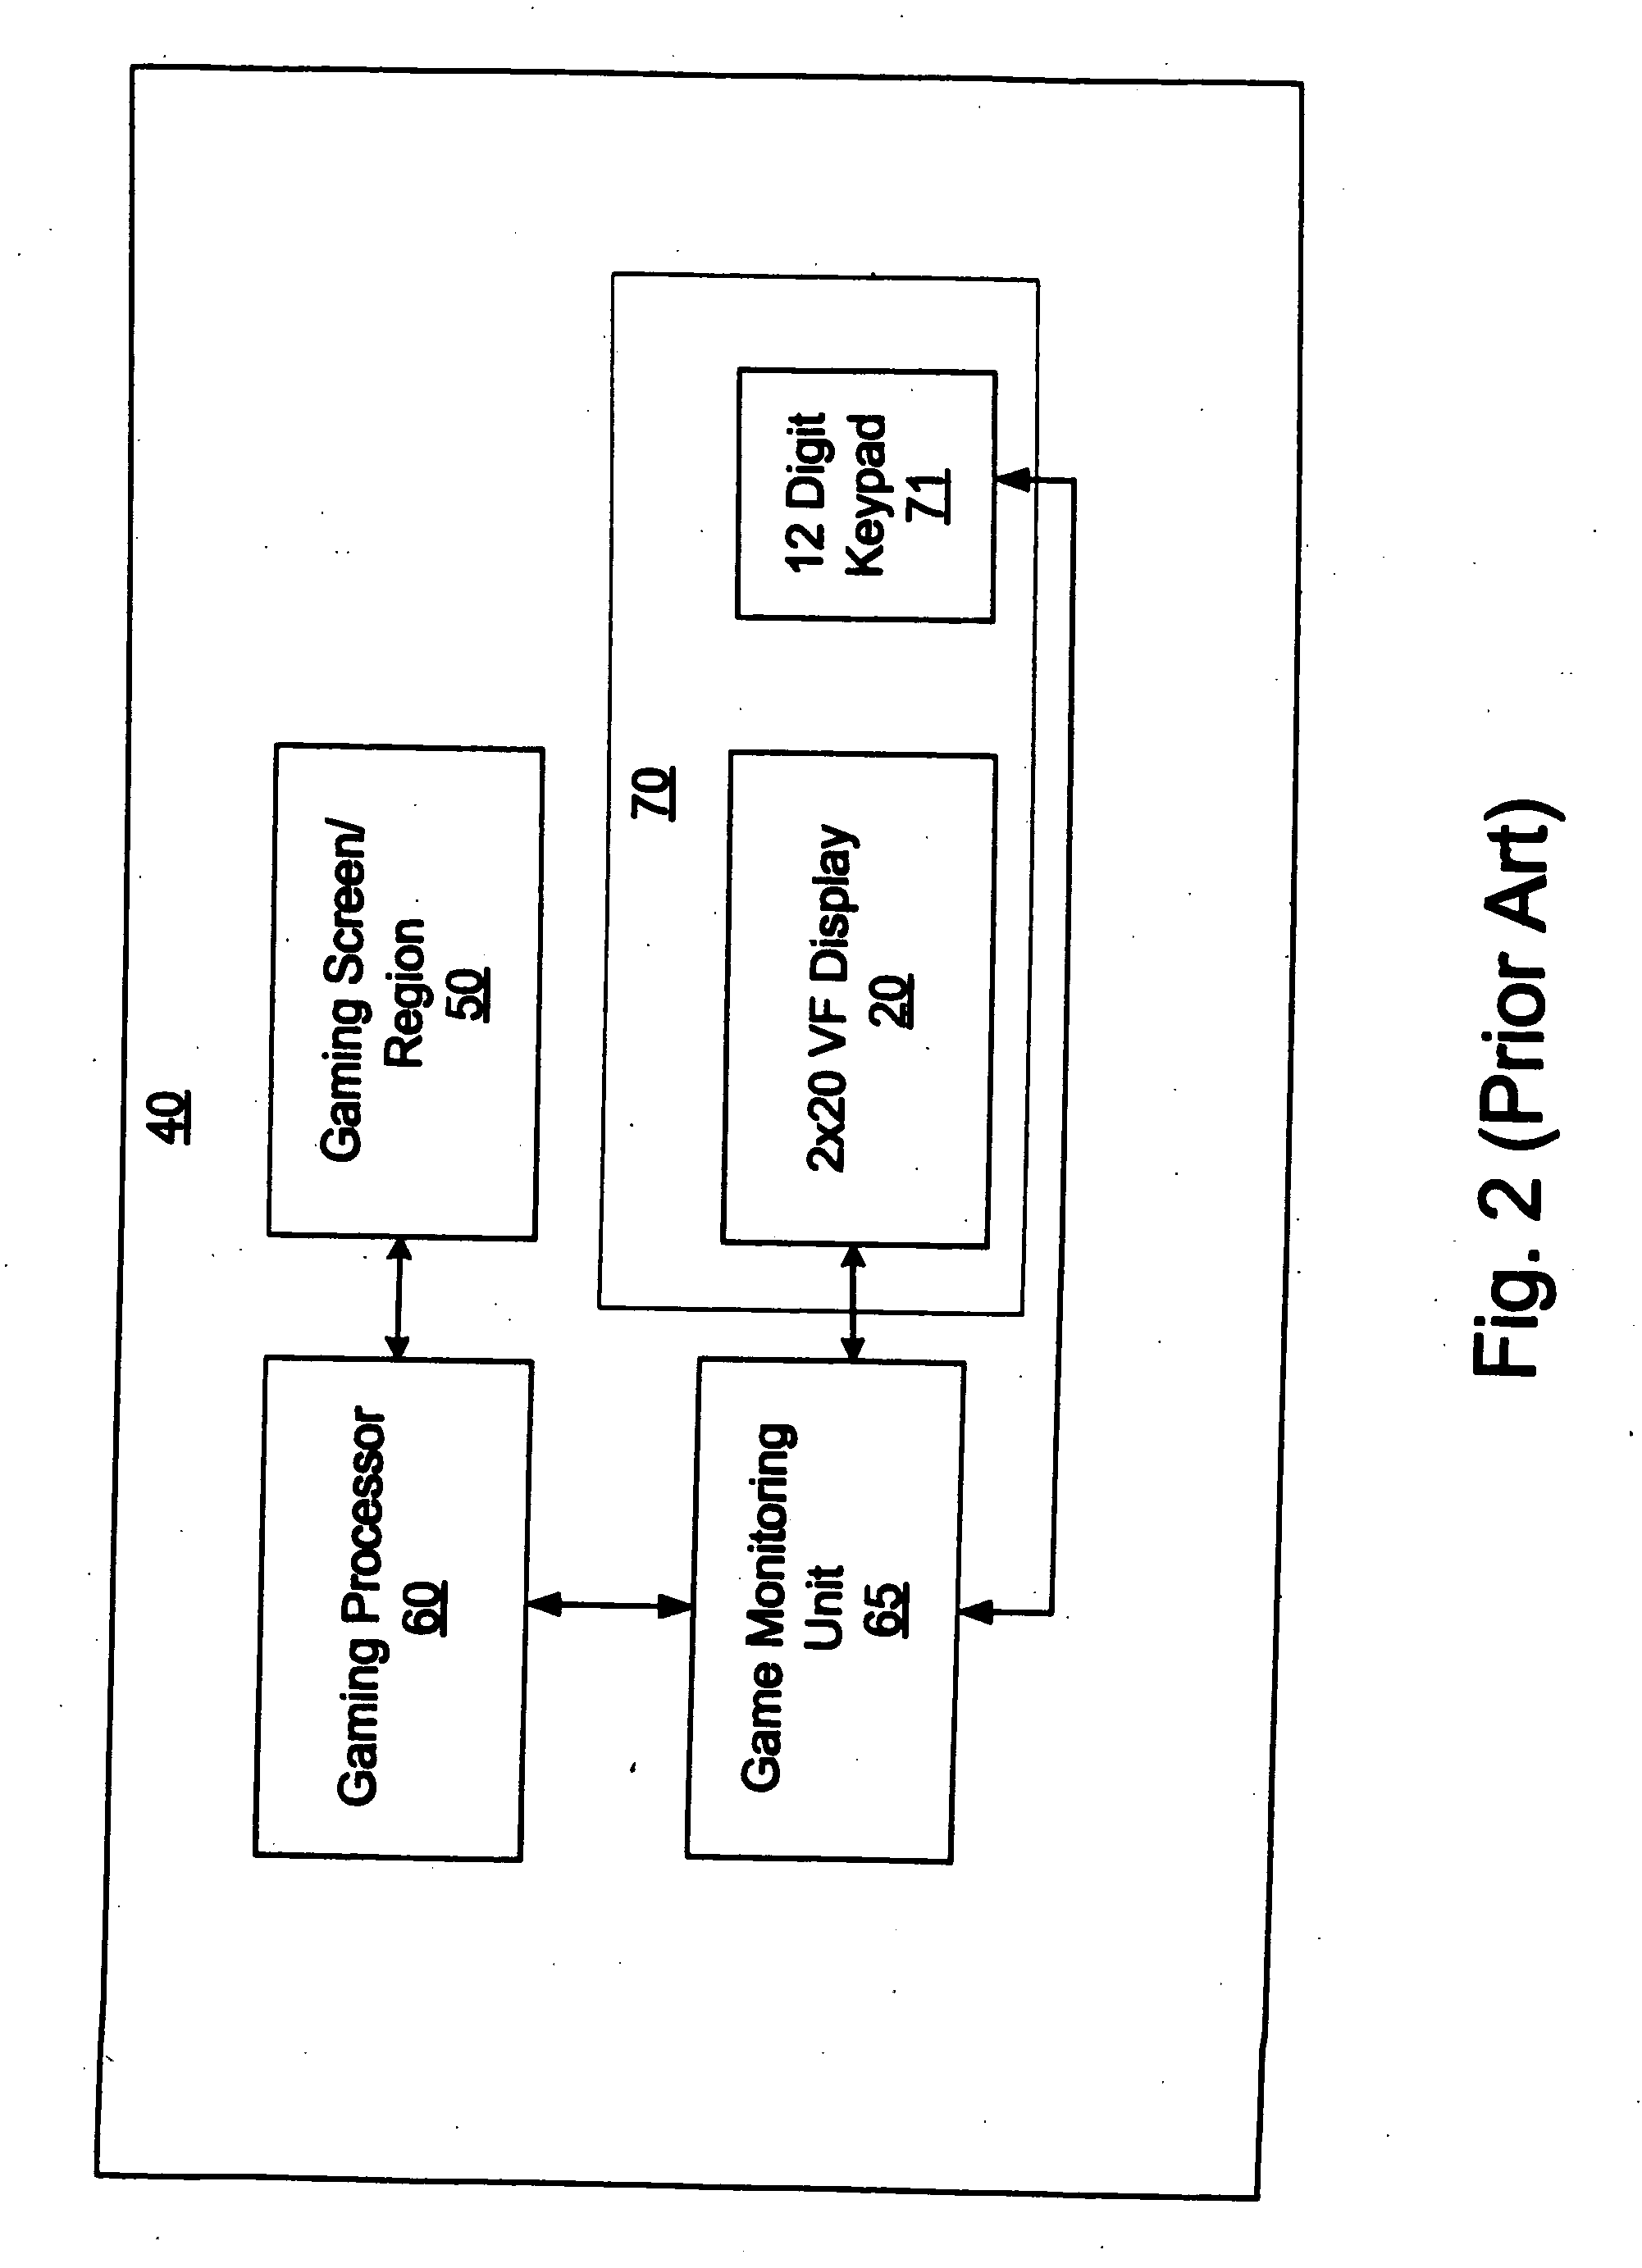 User interface system and method for creating and verifying signed content